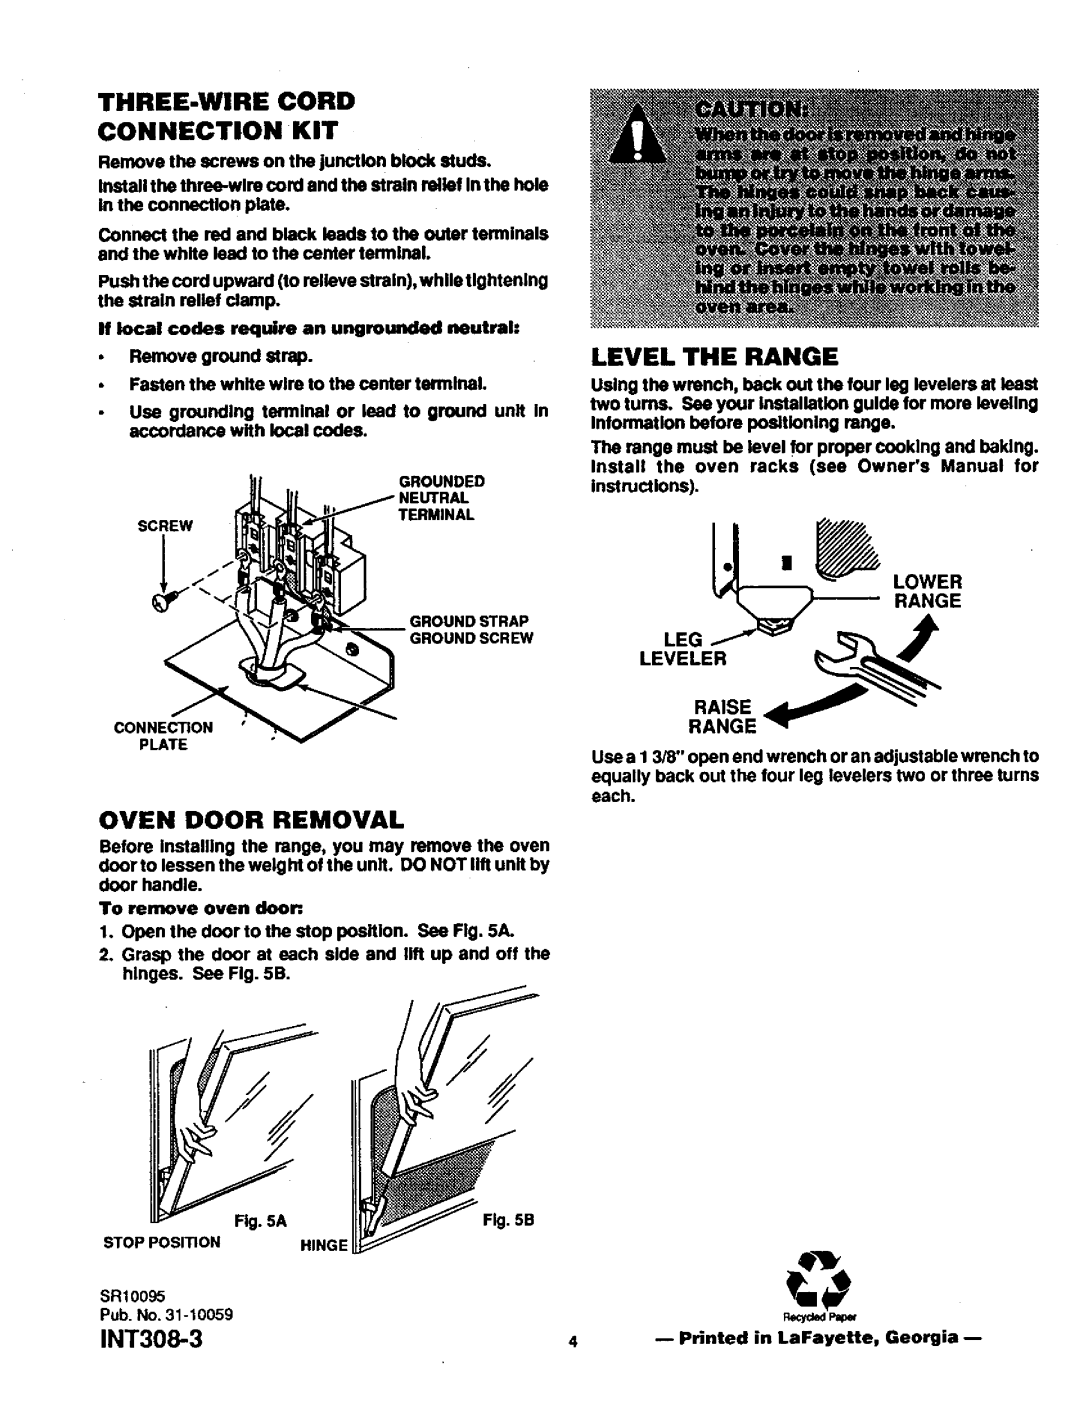 Sears SR10095 installation instructions Three-Wirecord Connection Kit, Level The Range, Oven Door Removal, INT30 